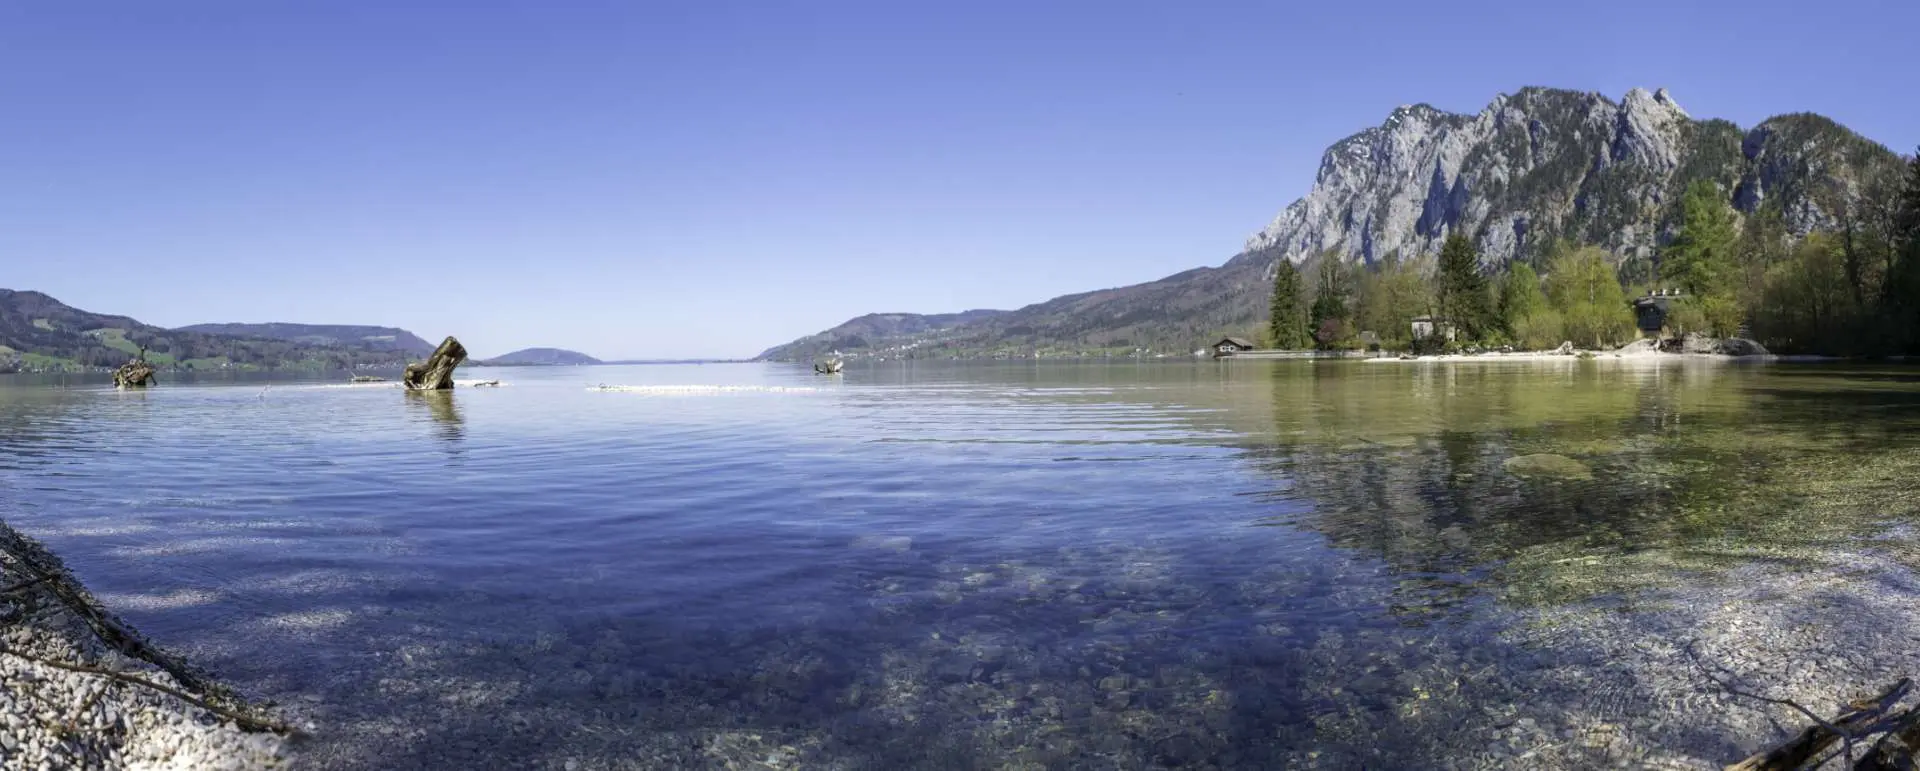 Attersee - the destination for students